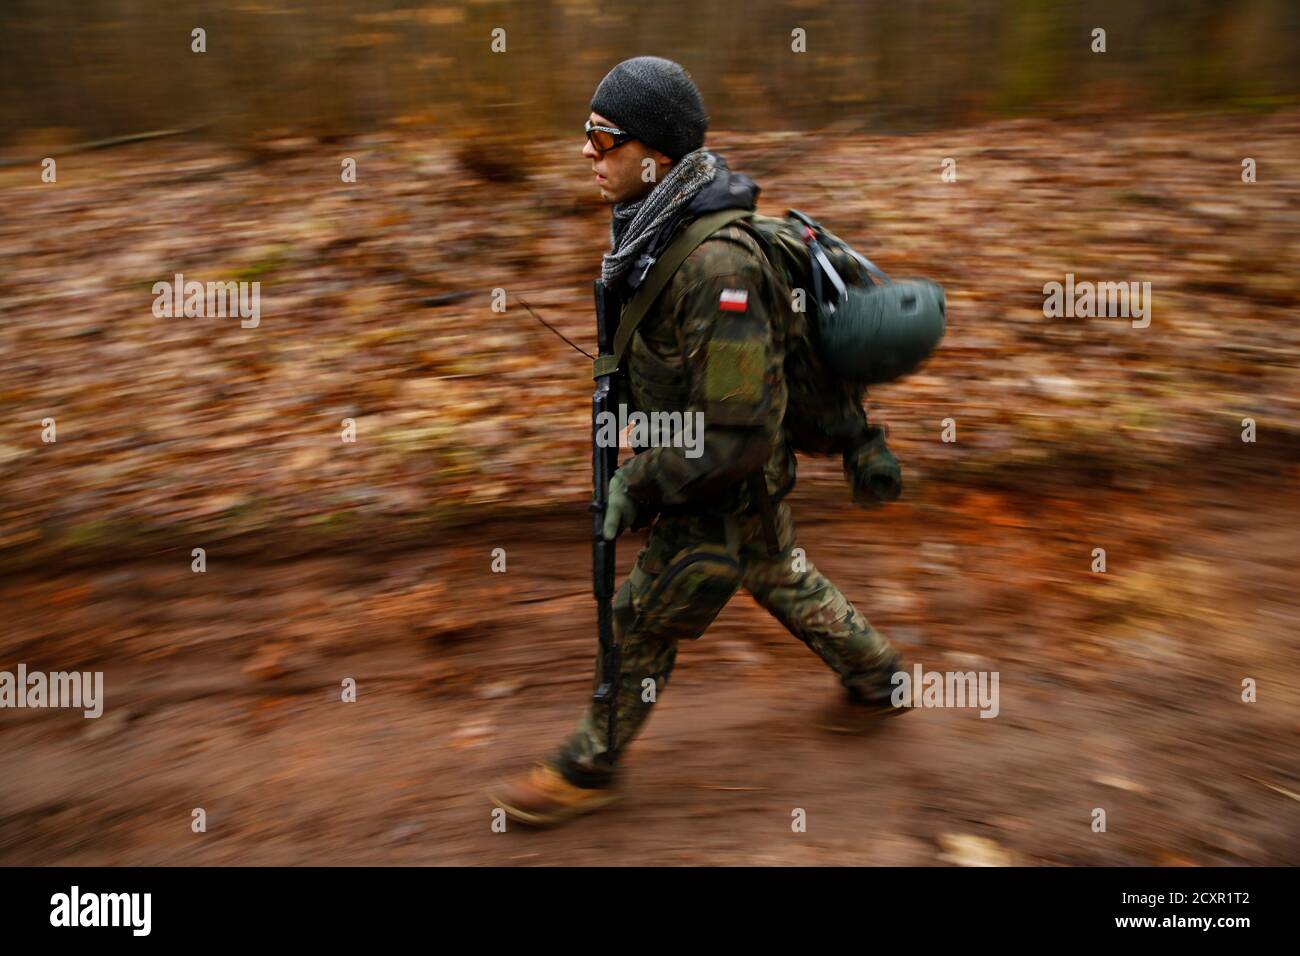 A man takes part in an endurance march during a territorial defence  training organised by paramilitary group SJS Strzelec (Shooters  Association) in the forest near Minsk Mazowiecki, eastern Poland March 14,  2014.